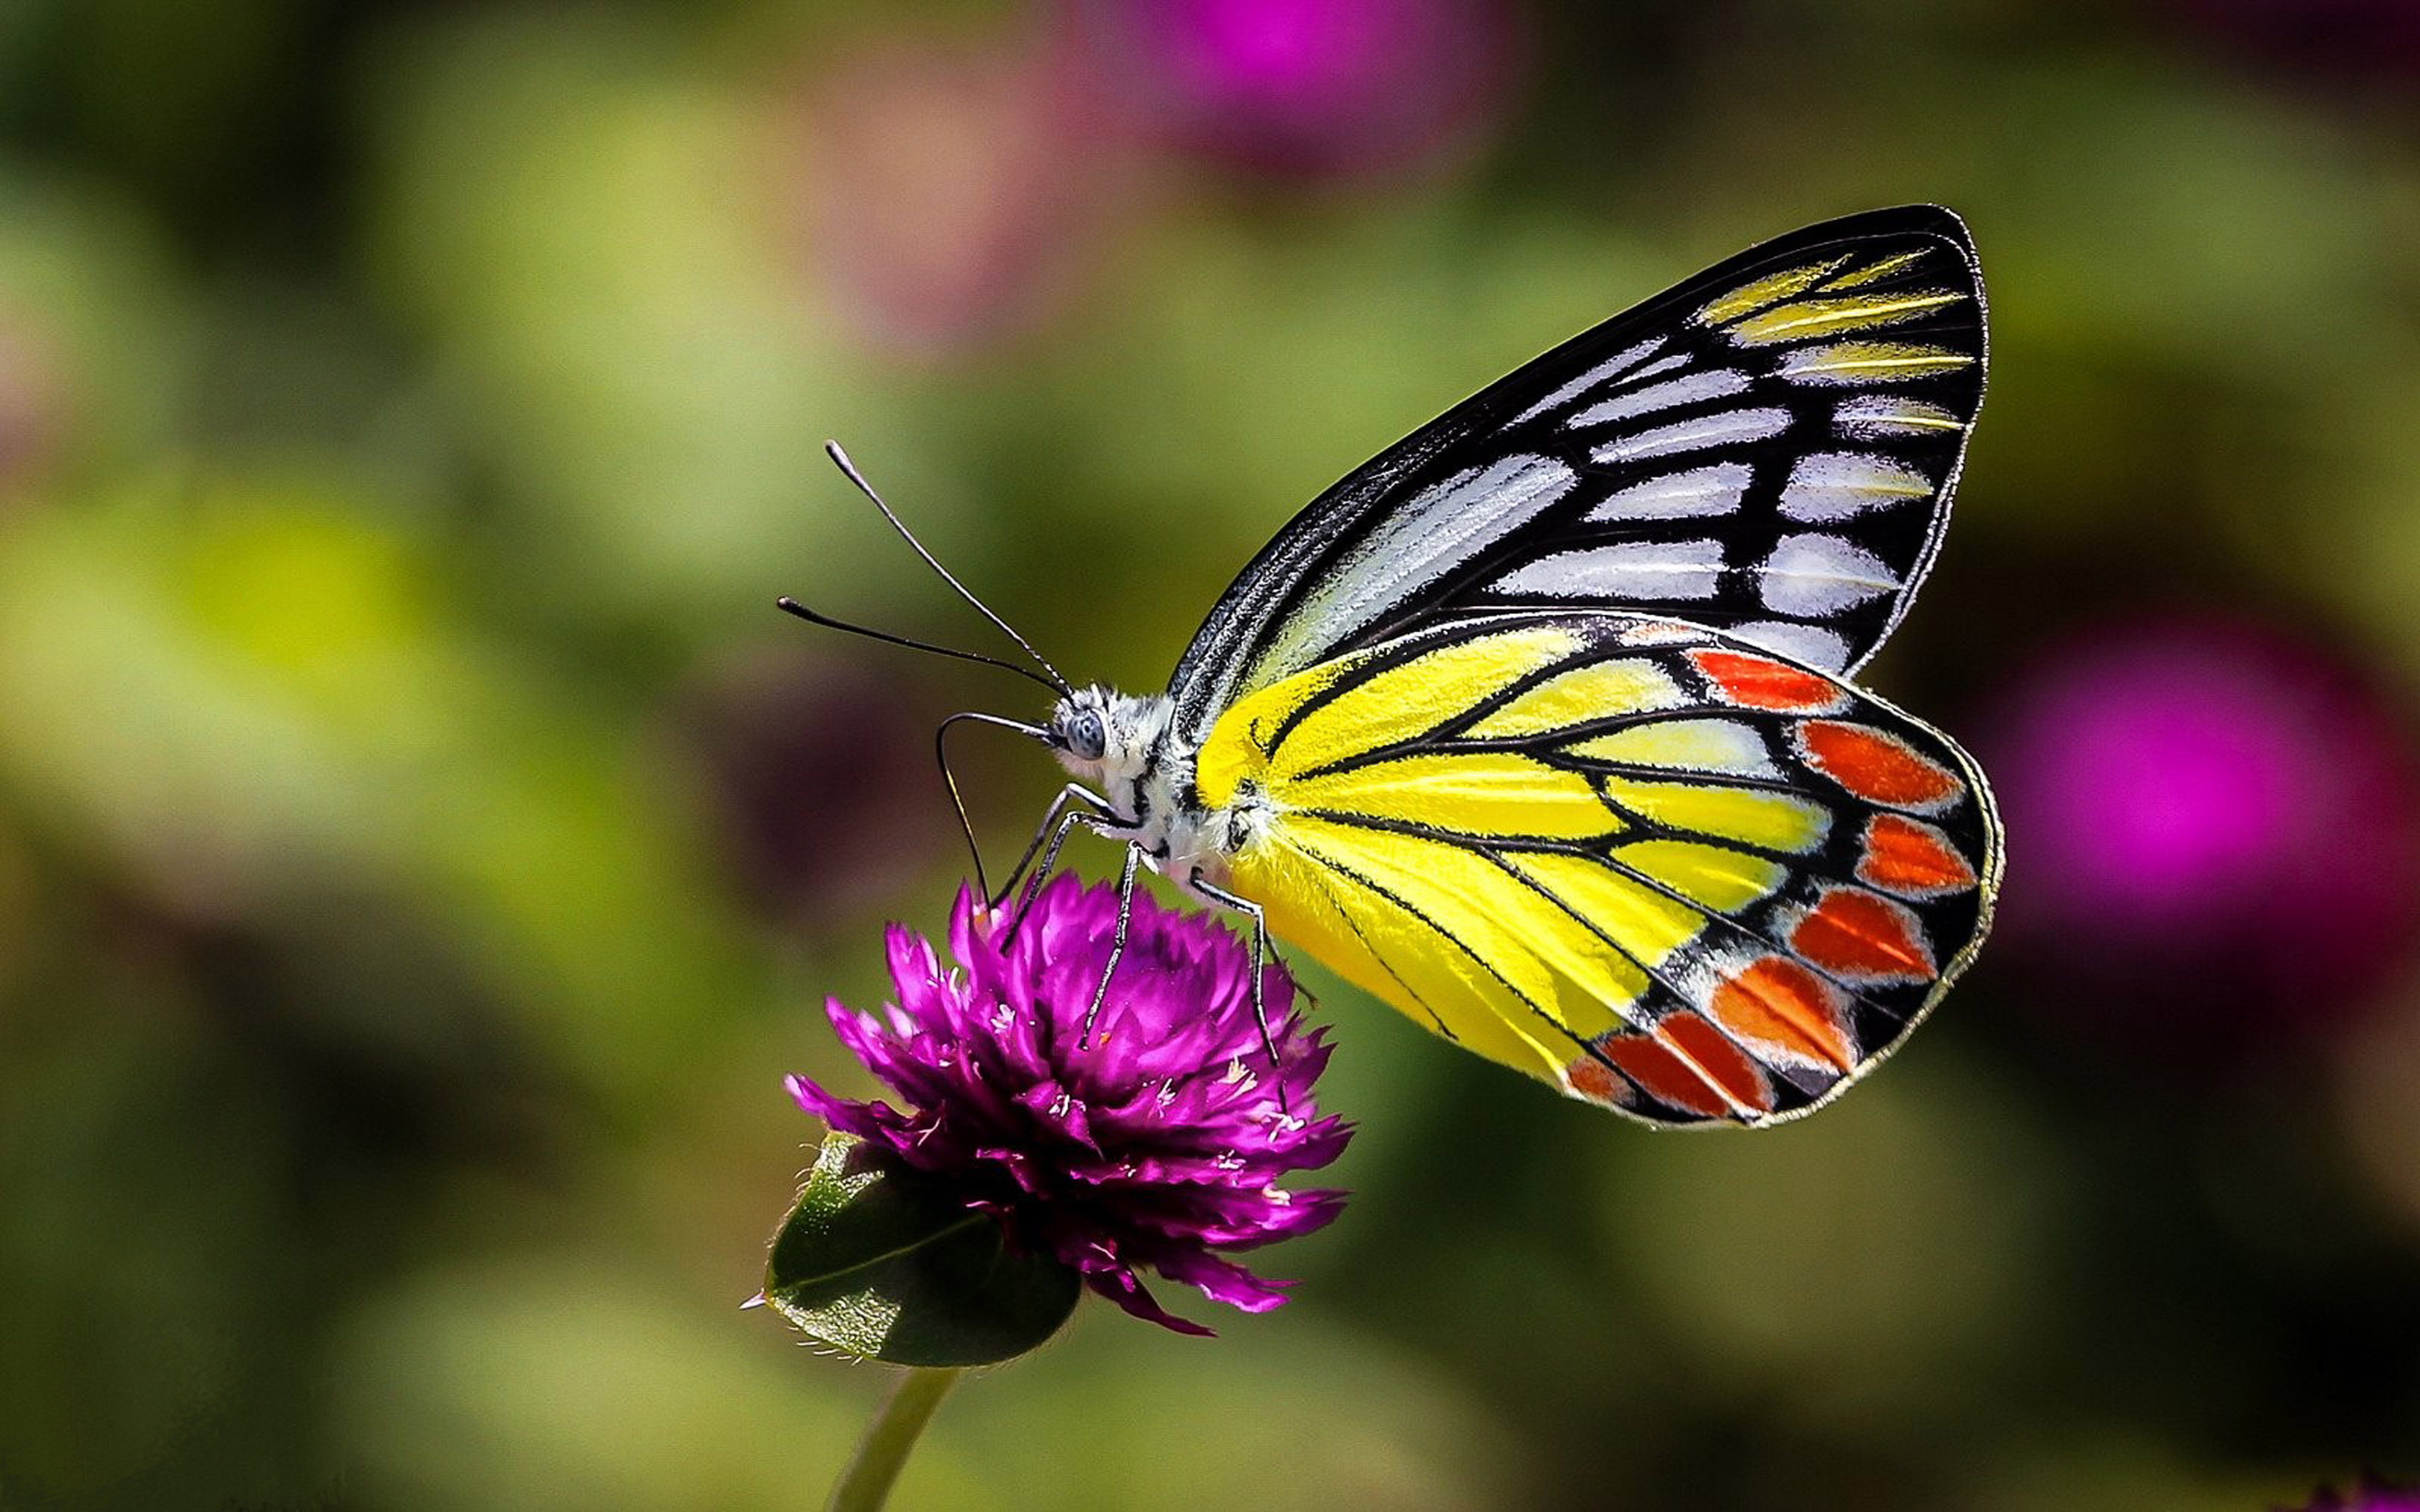 Insects Butterfly On Flower Macro Picture Ultra HD Wallpaper For